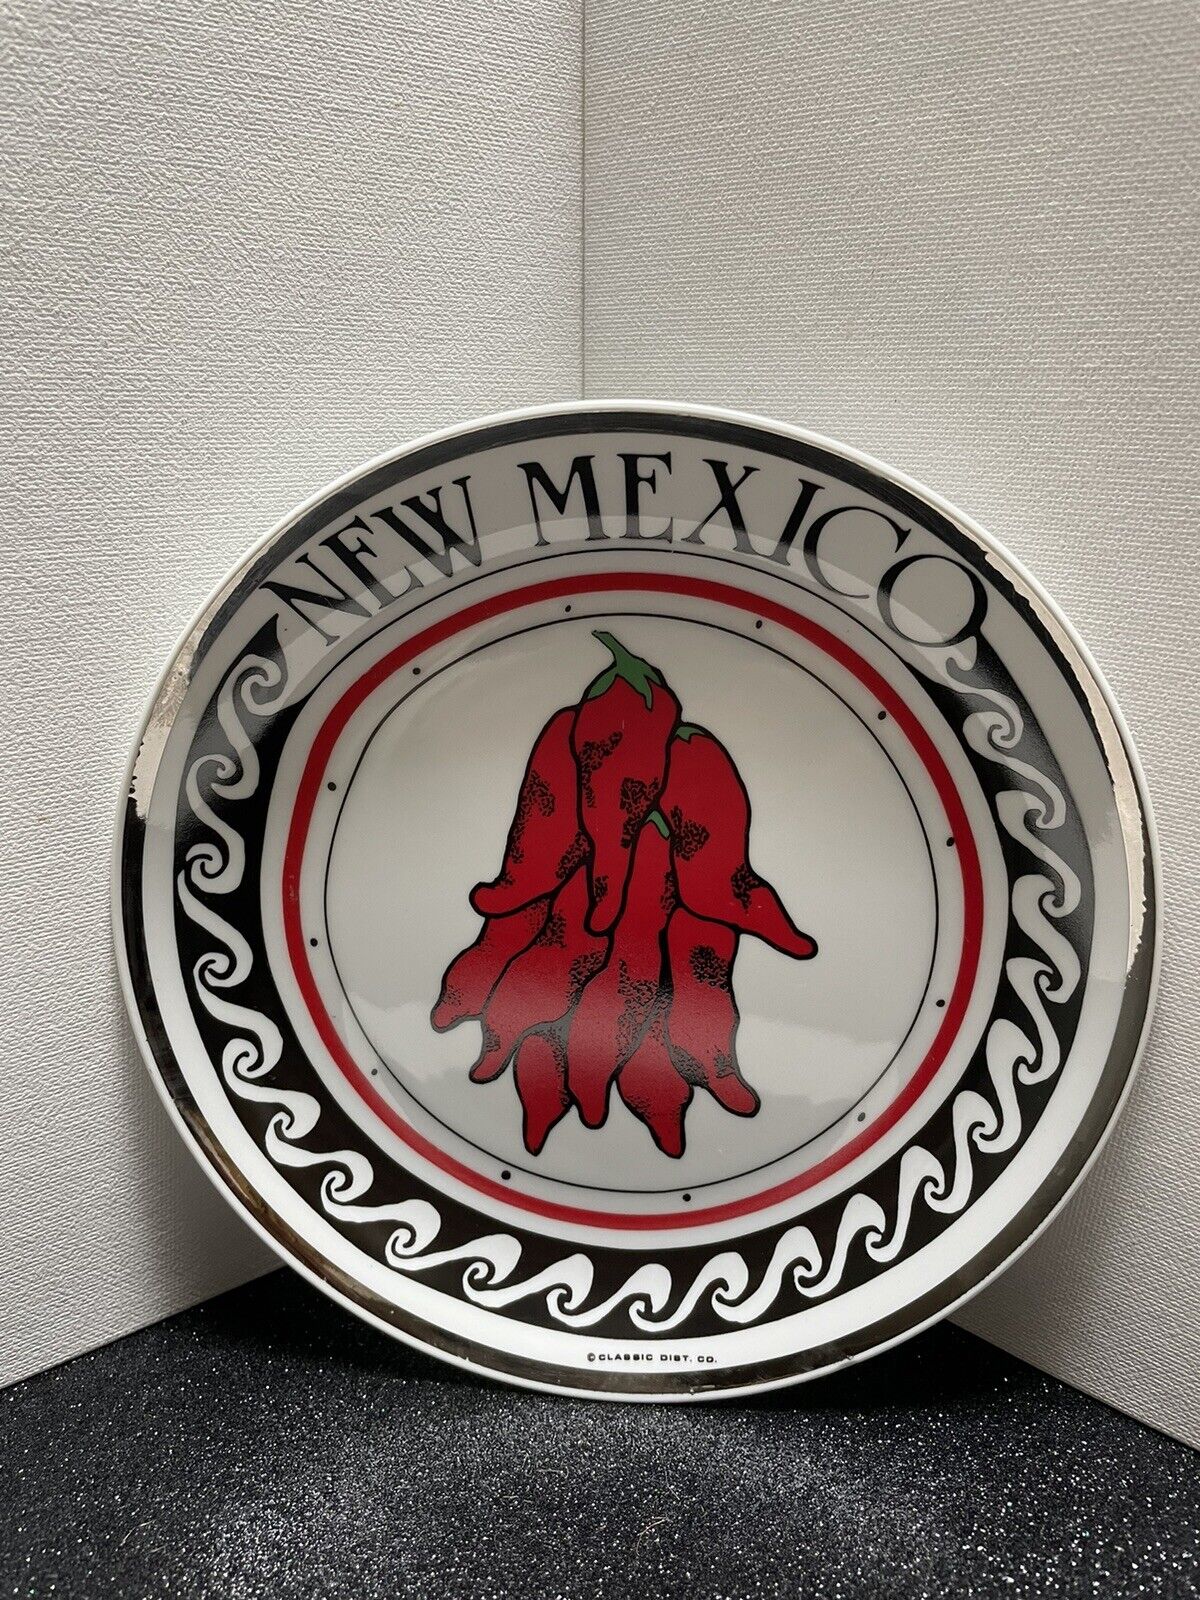 Vintage Ceramic New Mexico Red Chili Peppers Souvenir Plate Made in Korea 7.5 in